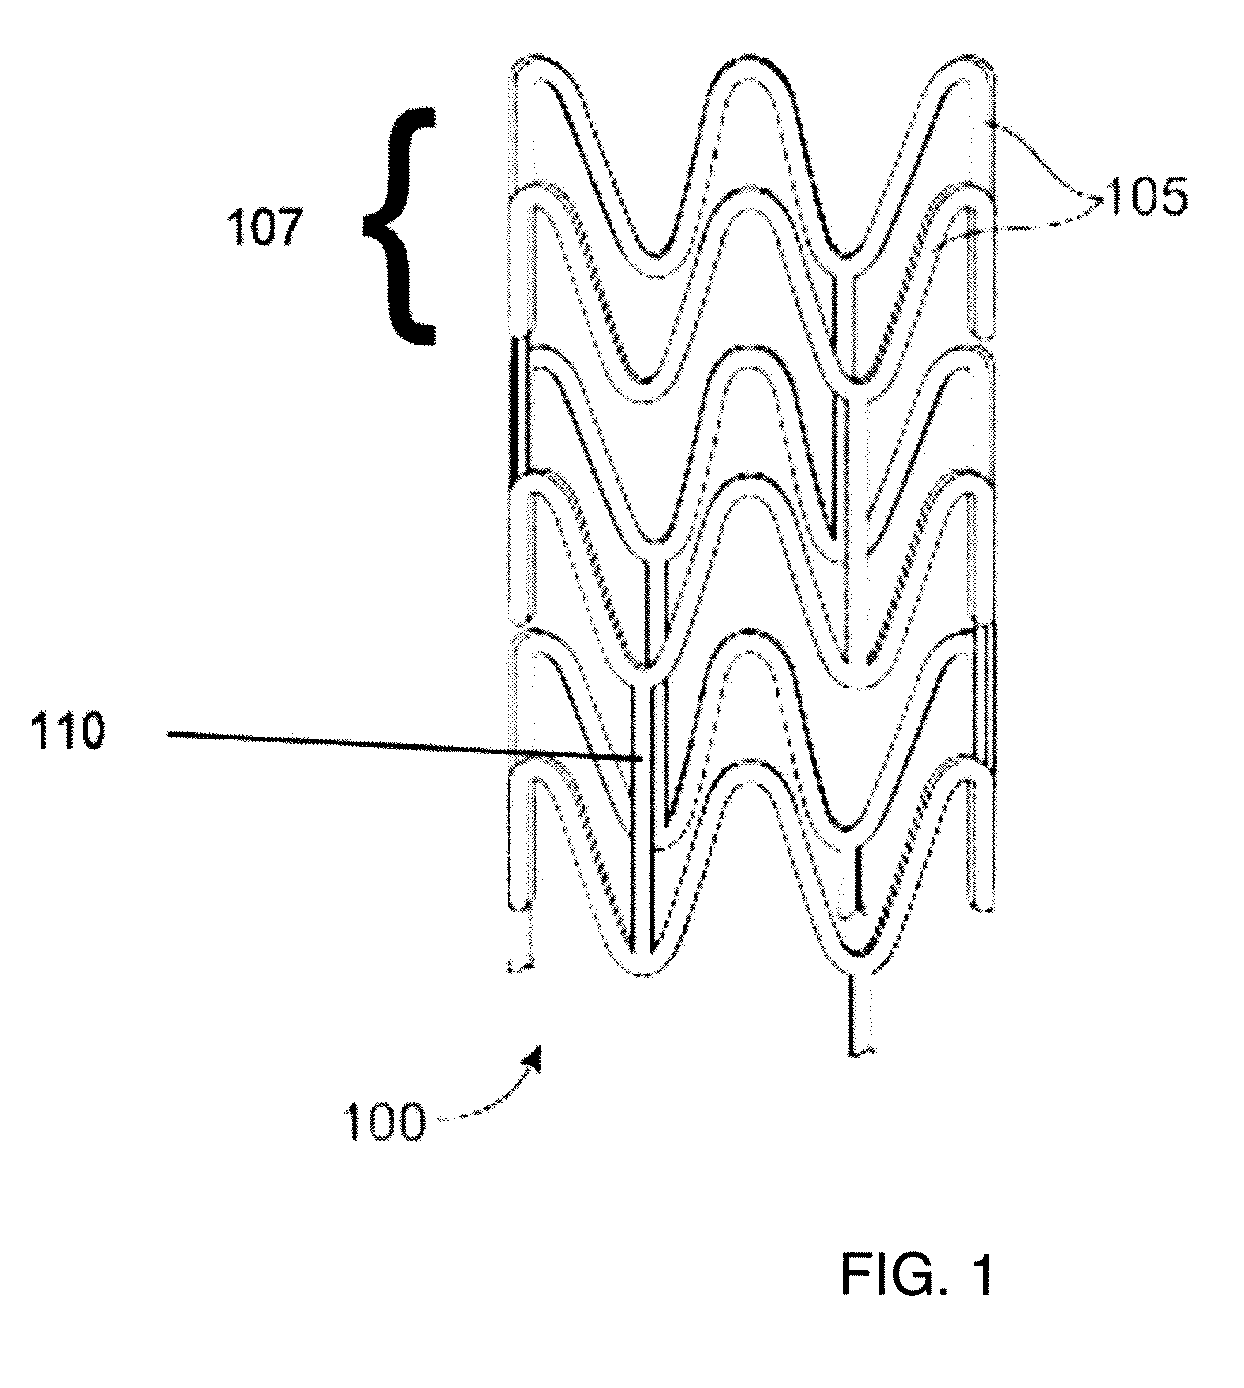 Bioabsorbable Scaffold With Particles Providing Delayed Acceleration of Degradation